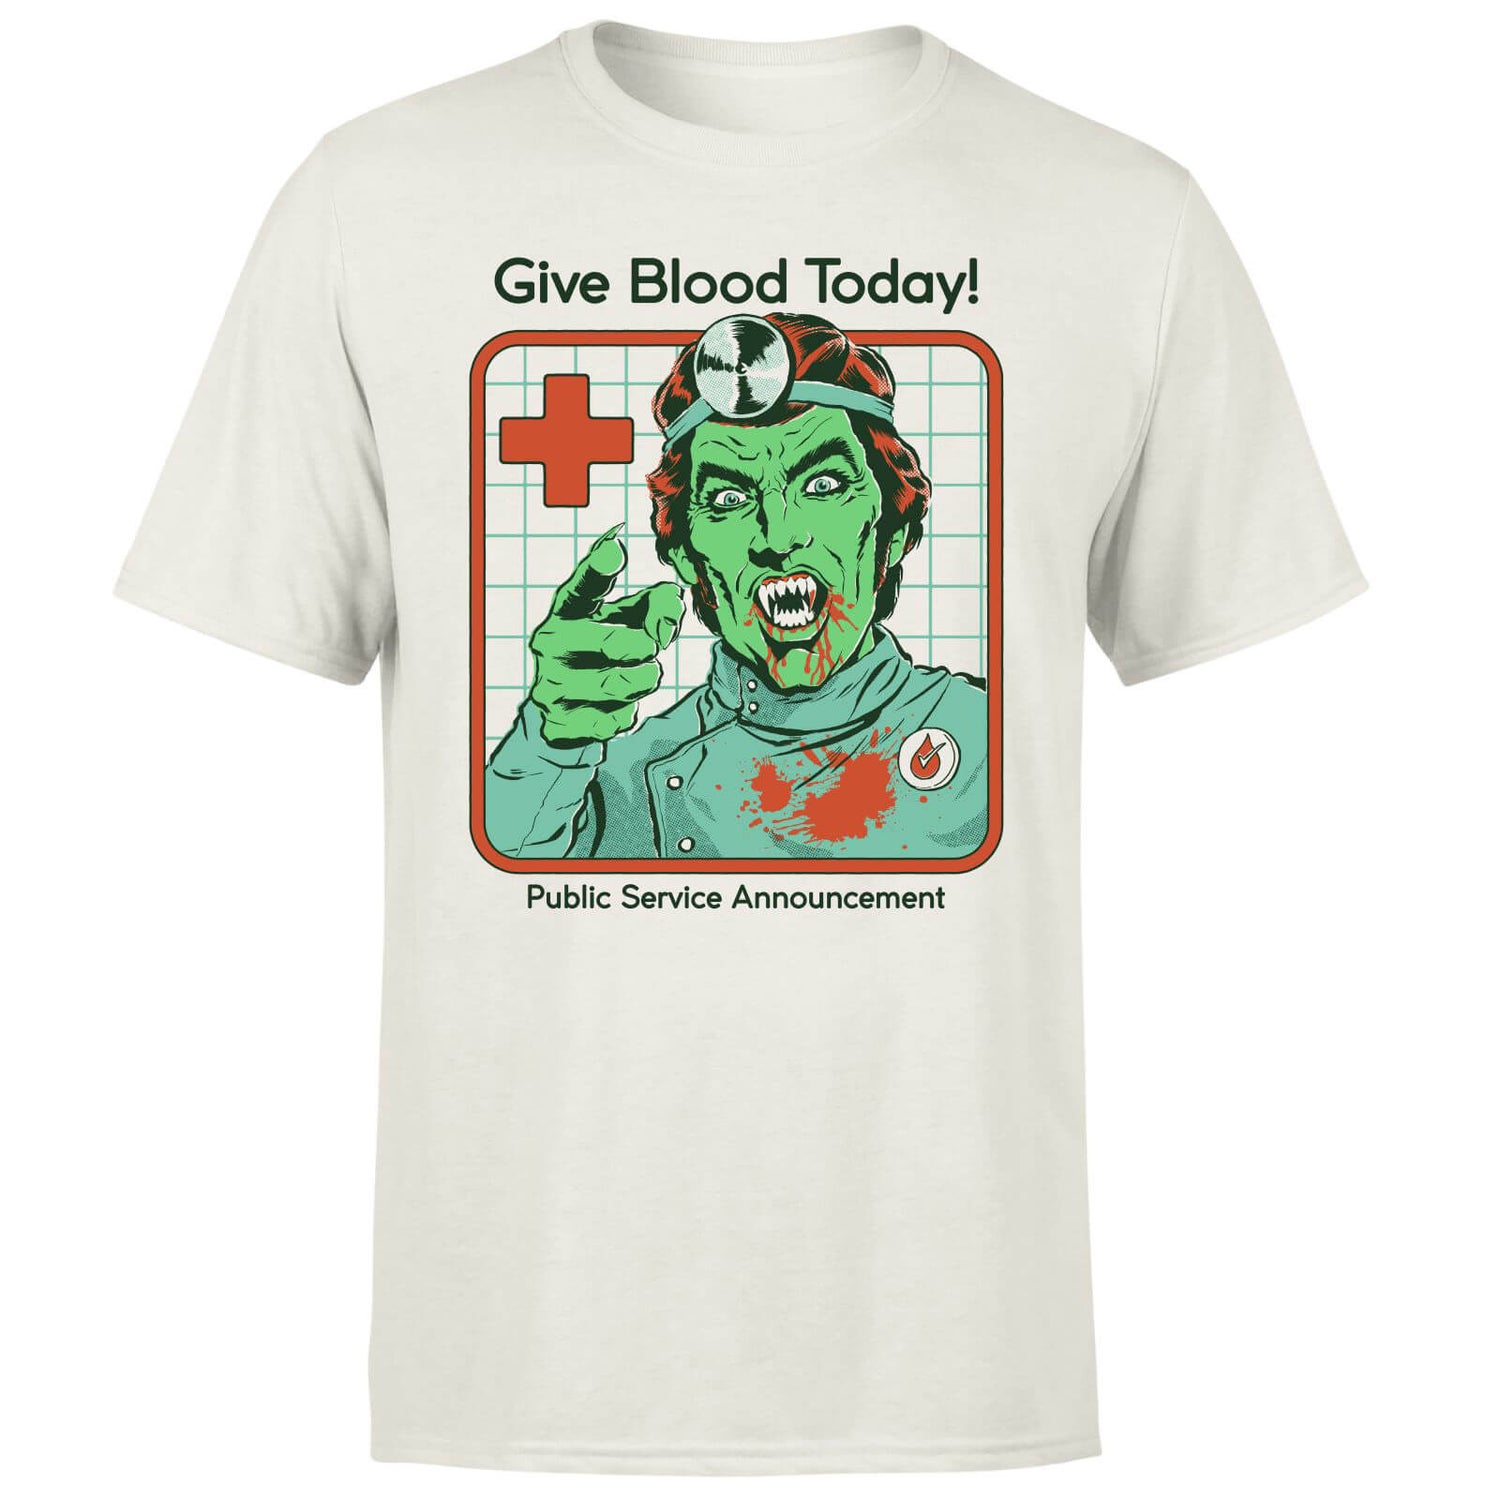 Give Blood Today Men's T-Shirt - White Vintage Wash